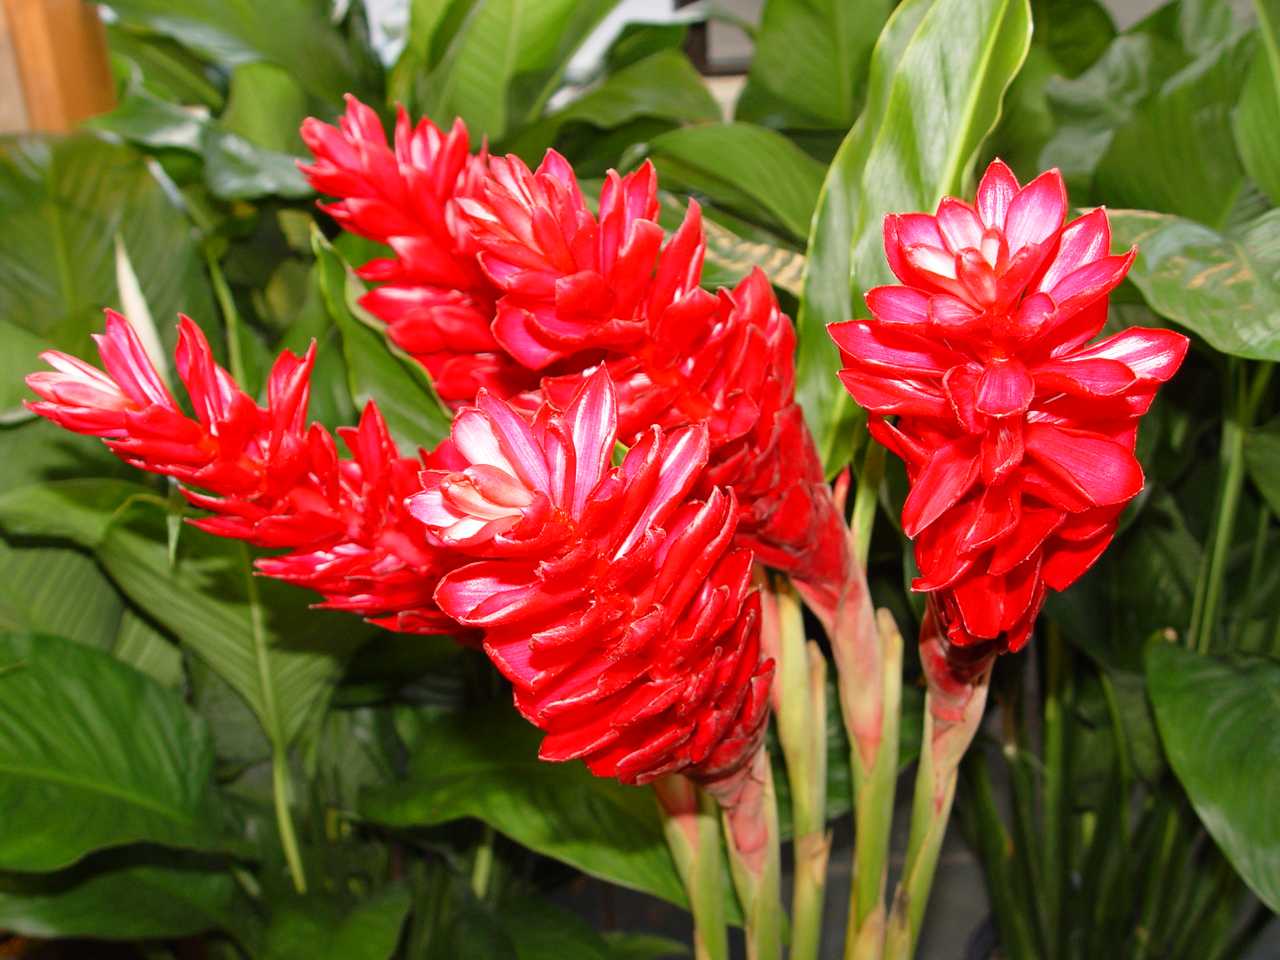 Red Ginger flowers available at Field of Flowers in South Florida